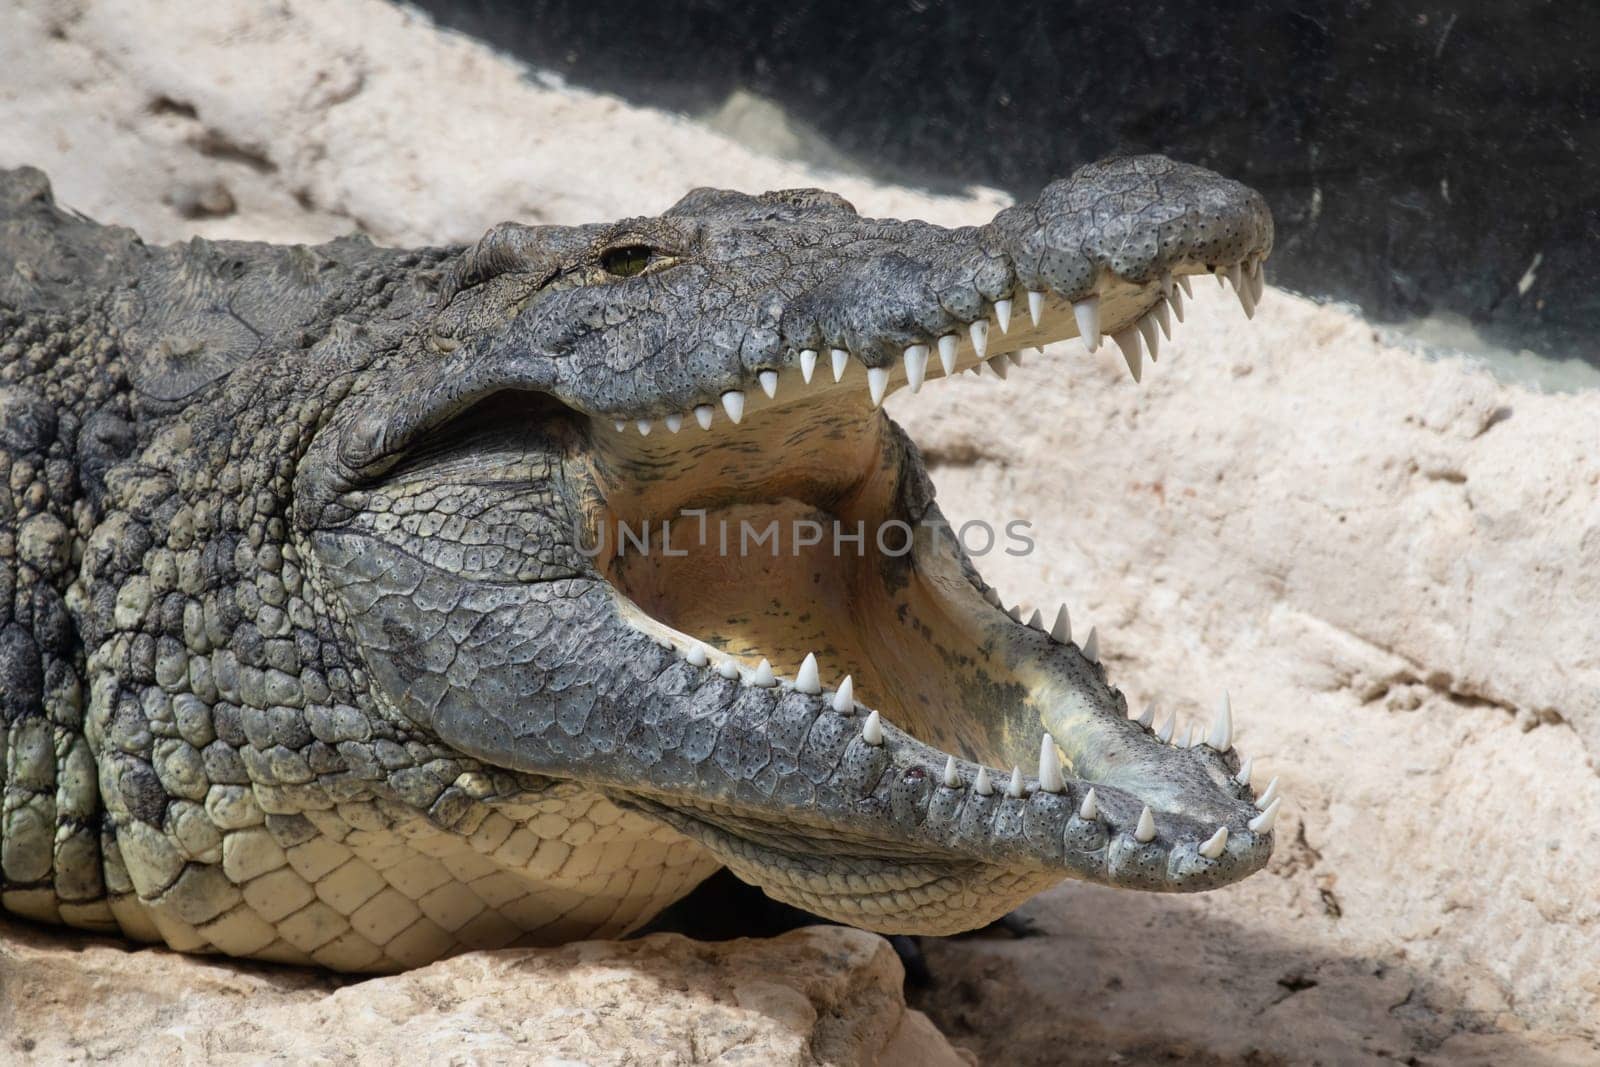 The crocodile opened its mouth waiting for food by gordiza